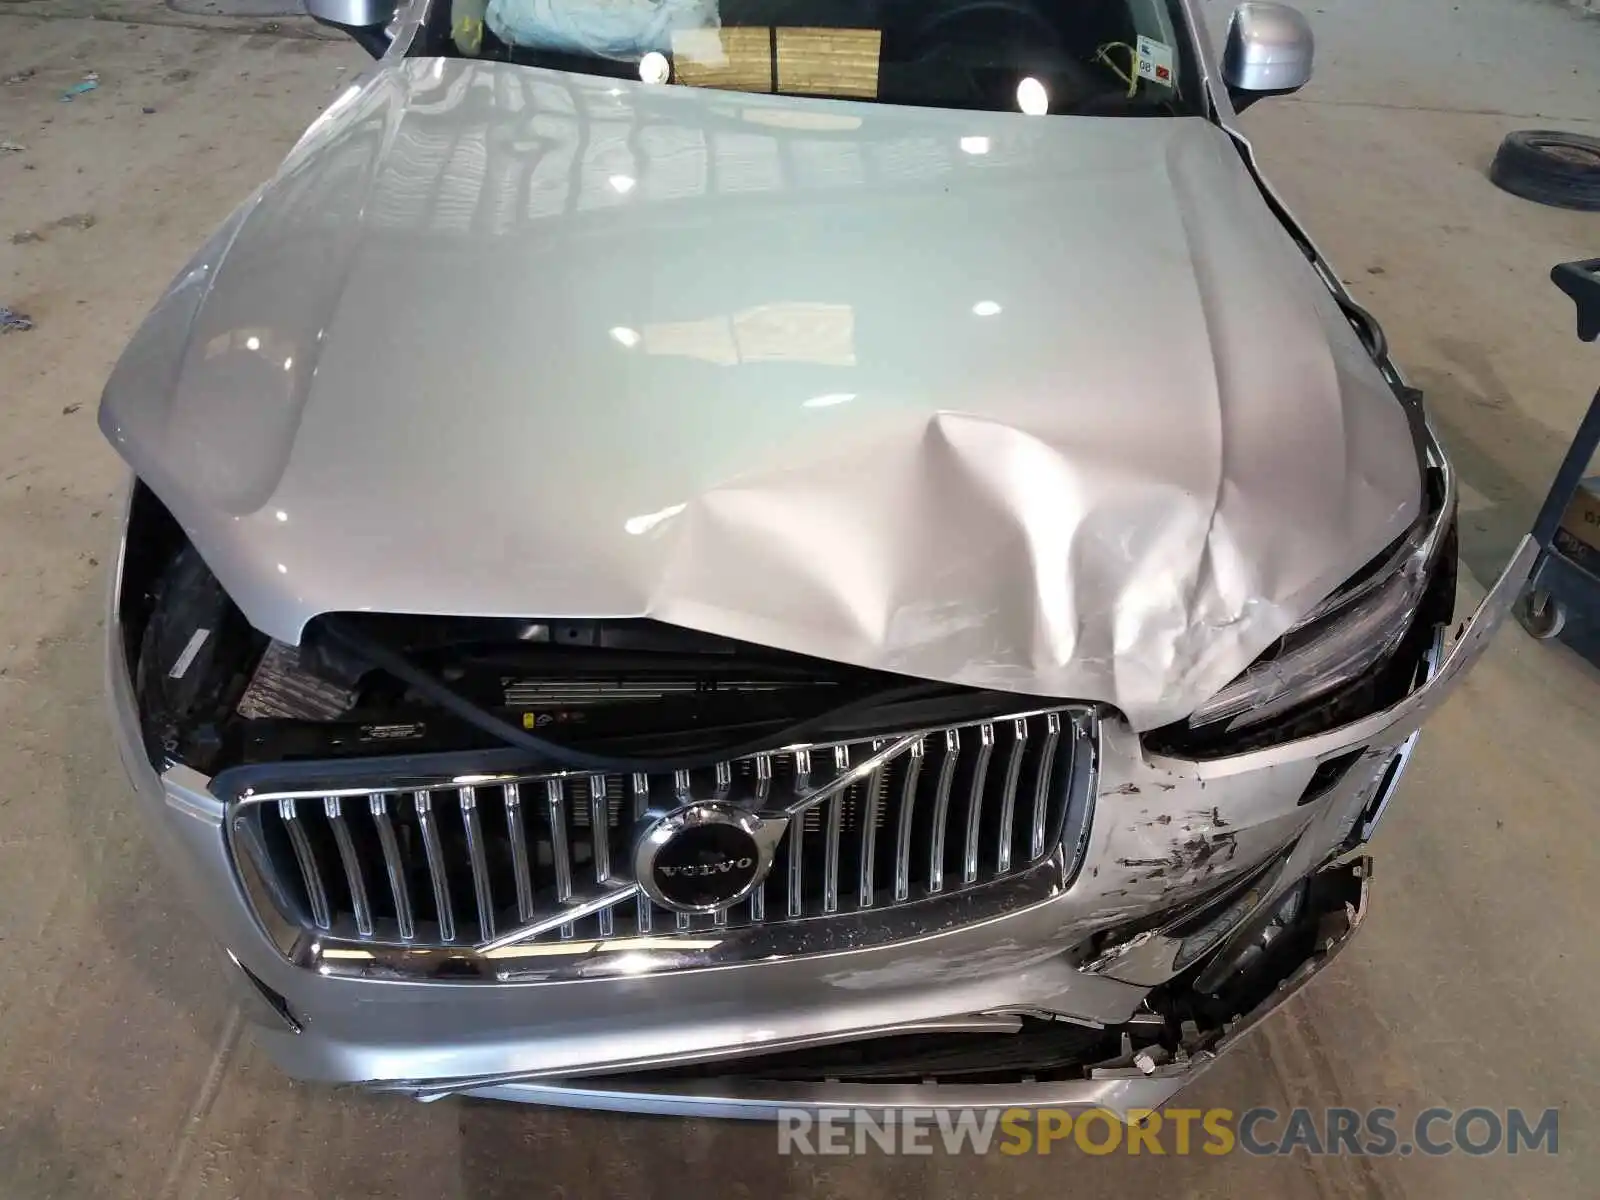 9 Photograph of a damaged car YV4A22PL3L1592953 VOLVO XC90 T6 IN 2020